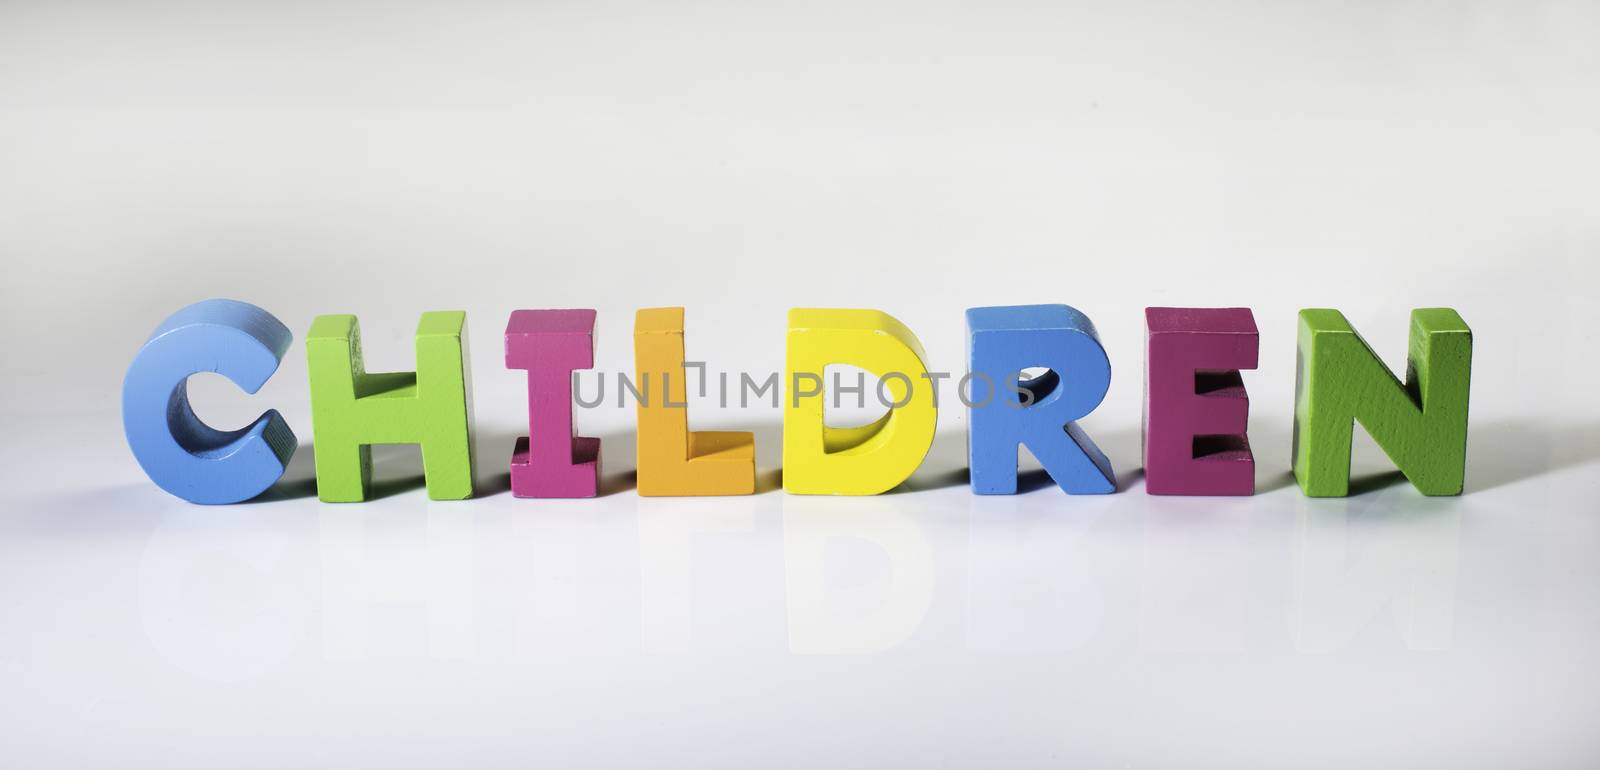 Multicolored text children made of wood. White background